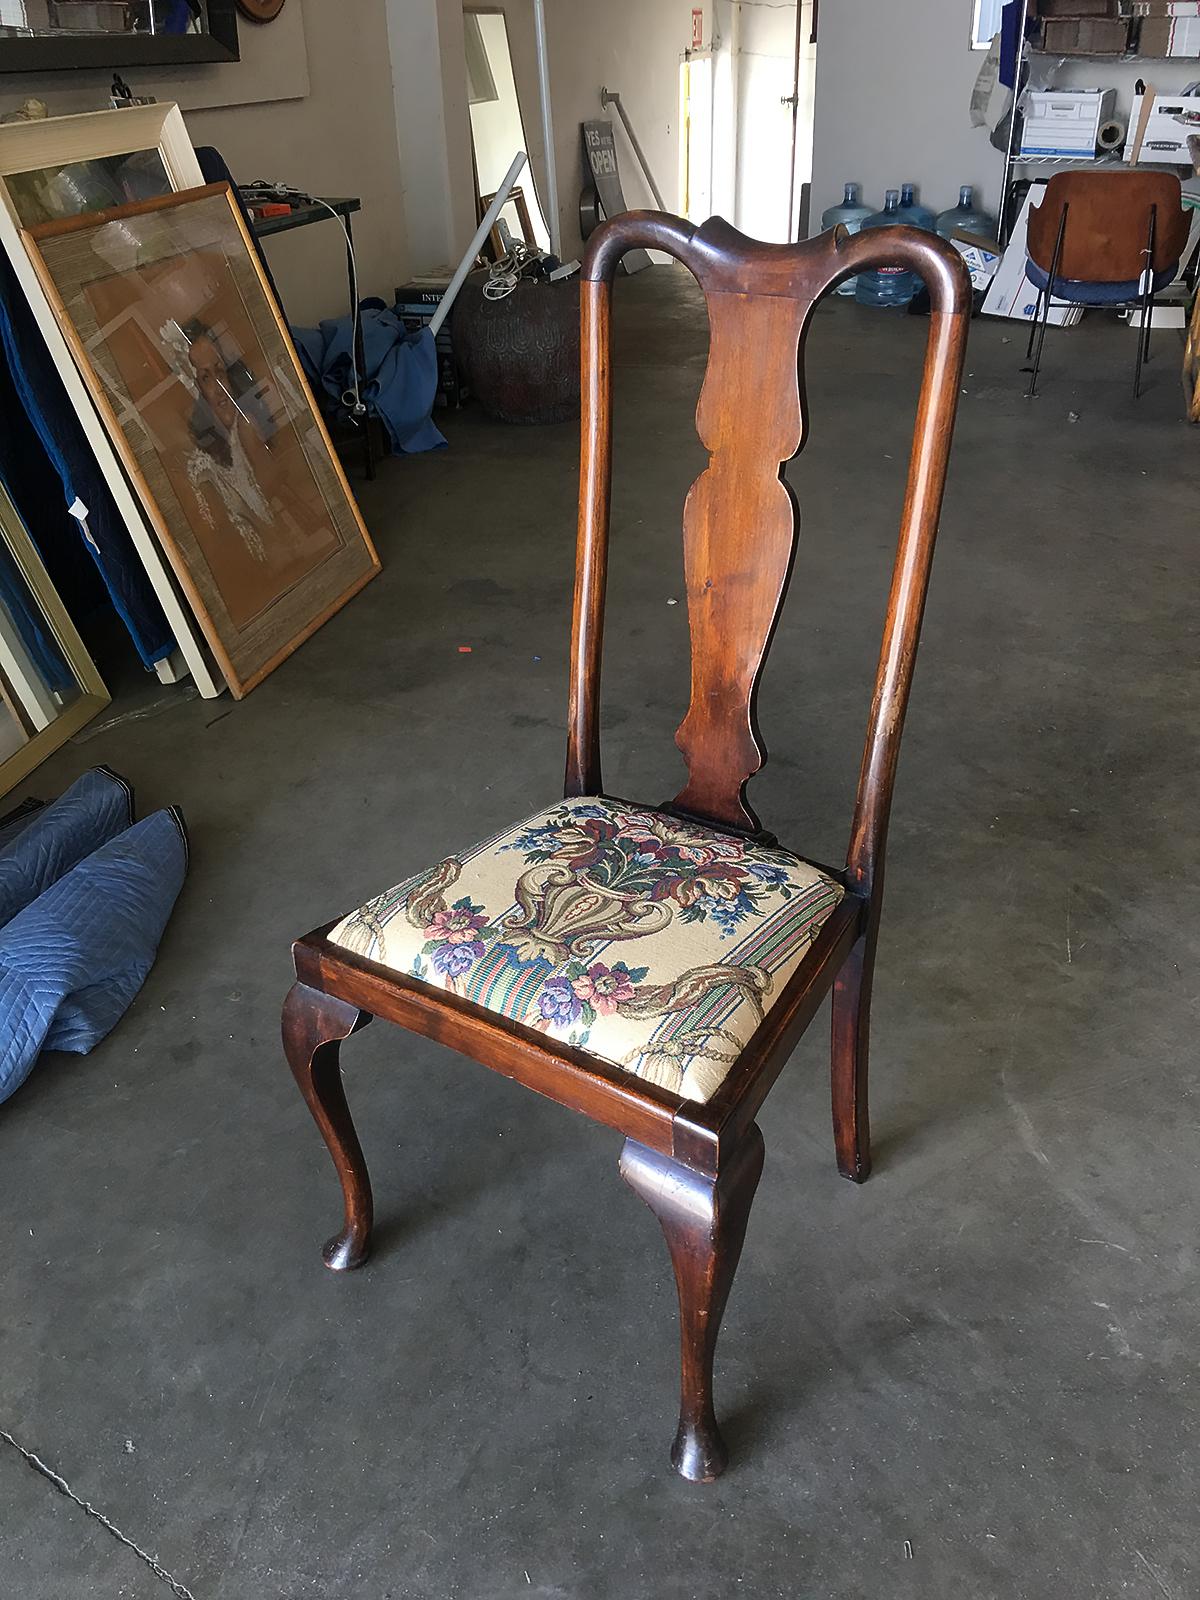 Pre-War Mahogany Art Deco Era Dining Room Chair Set of Four In Excellent Condition For Sale In Van Nuys, CA